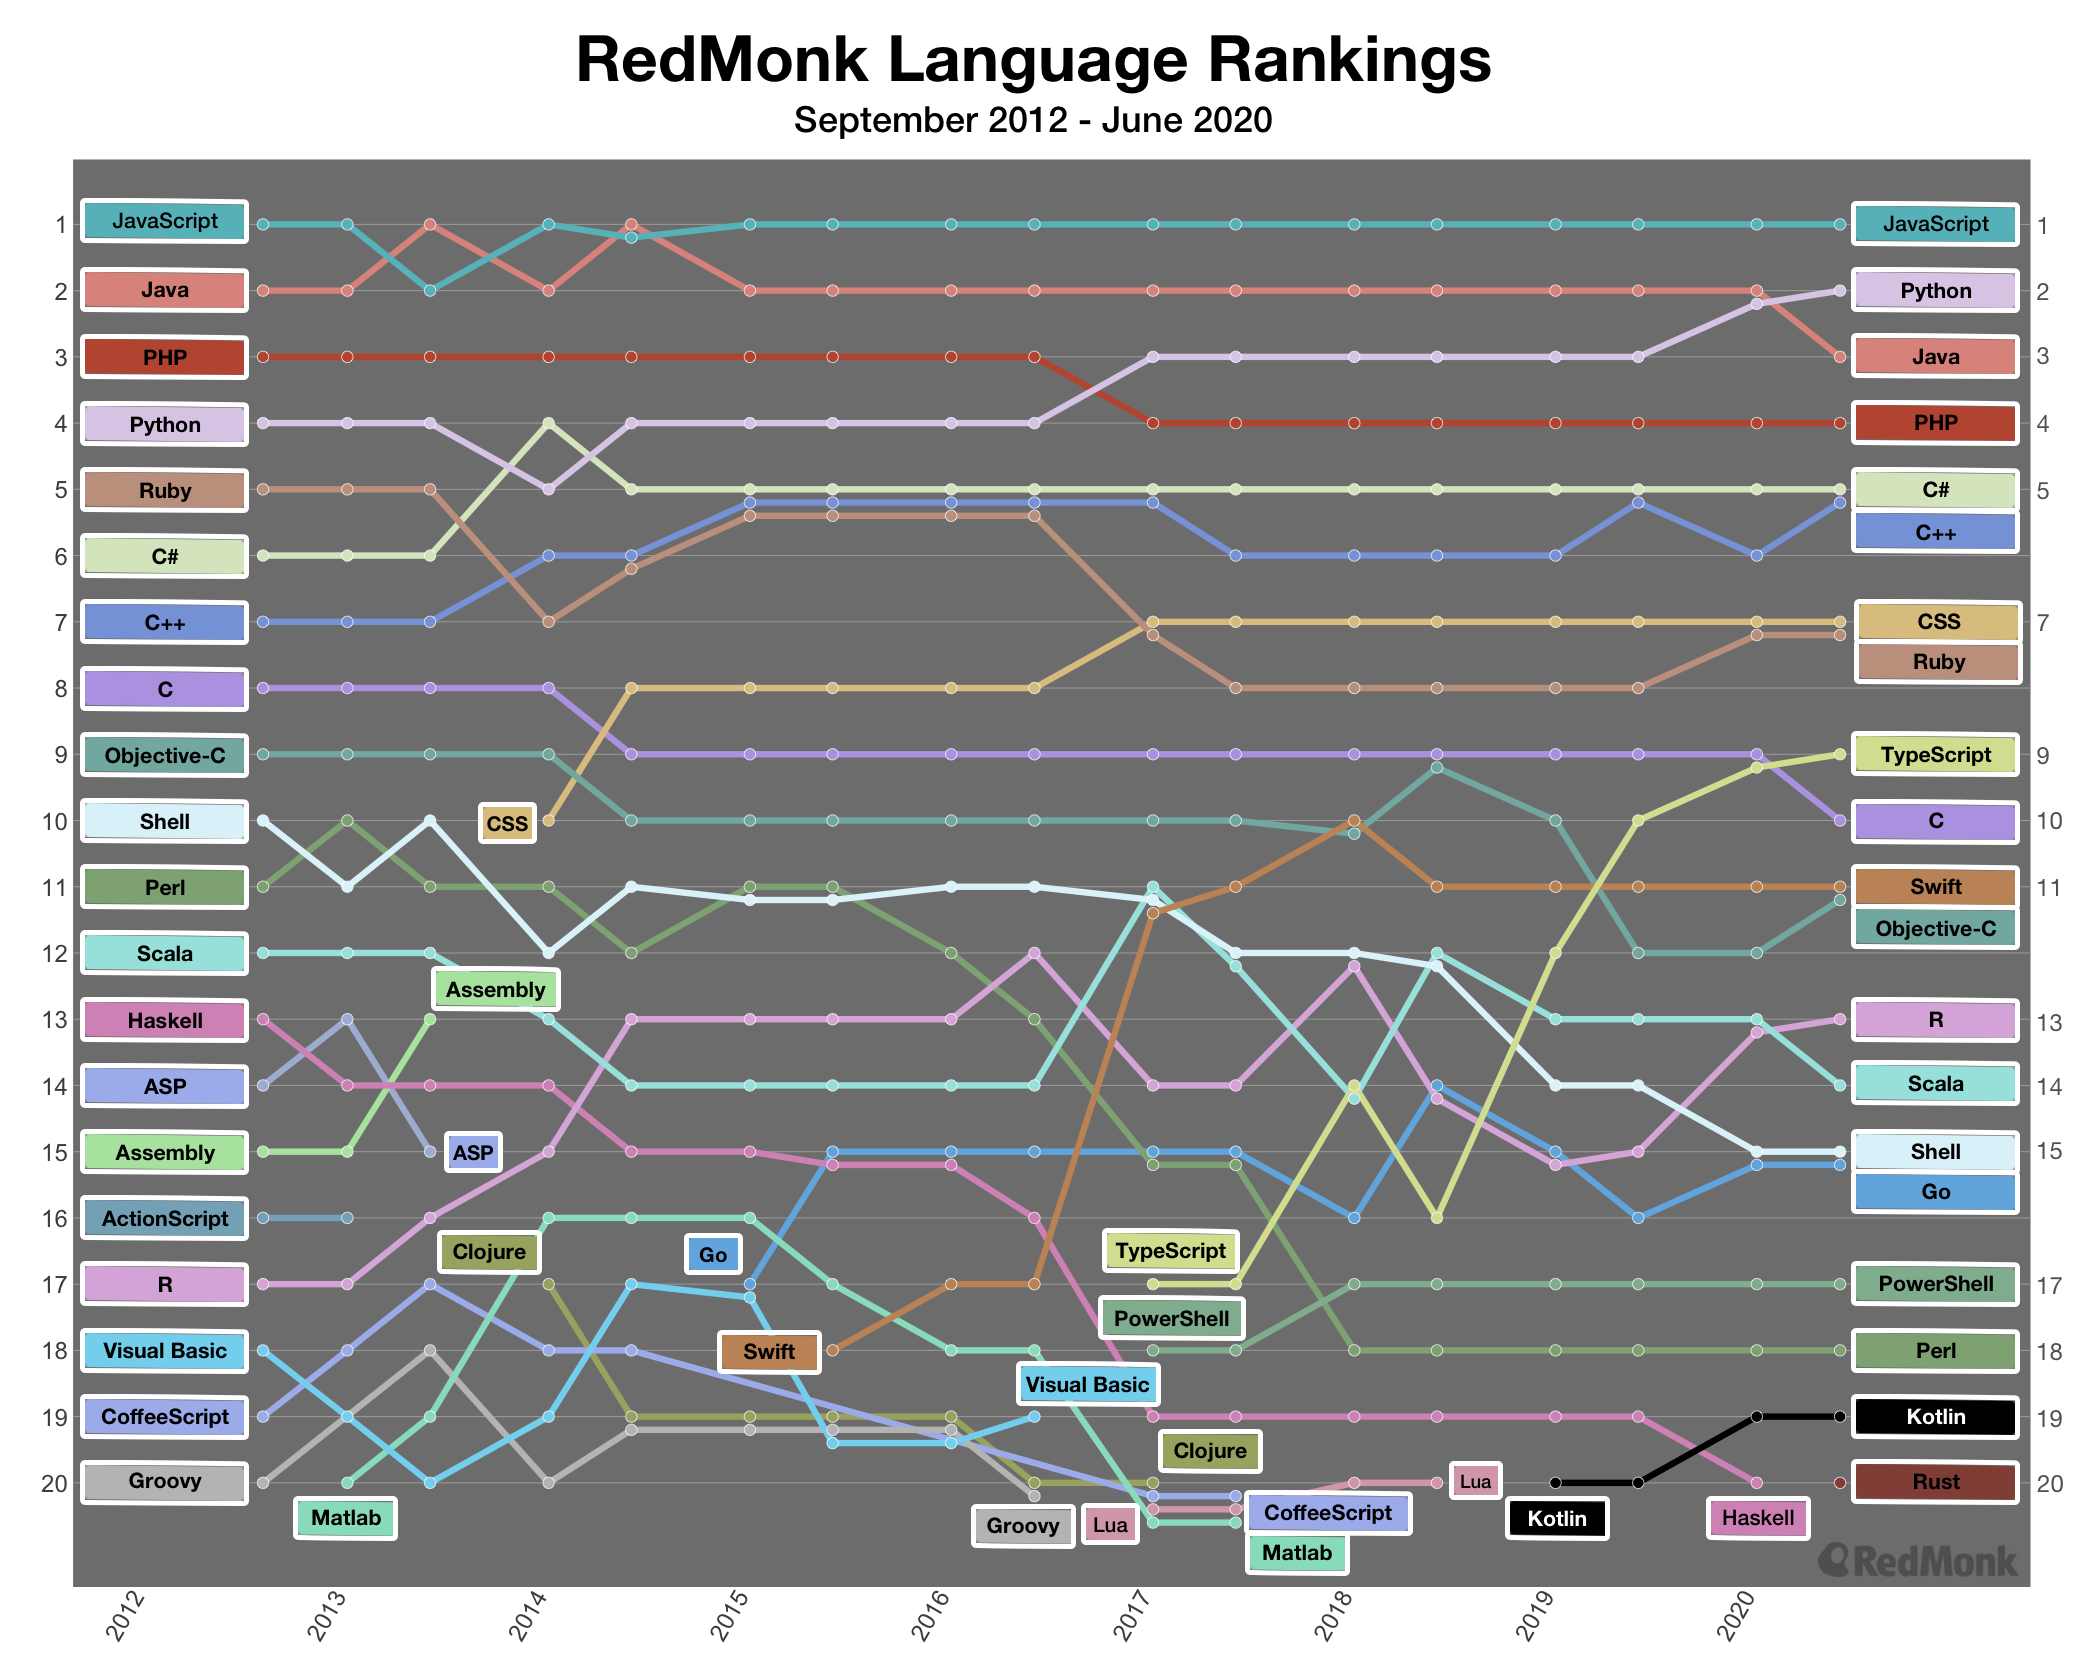 Graph of RedMonk Language Rankings from September 2012-June2020